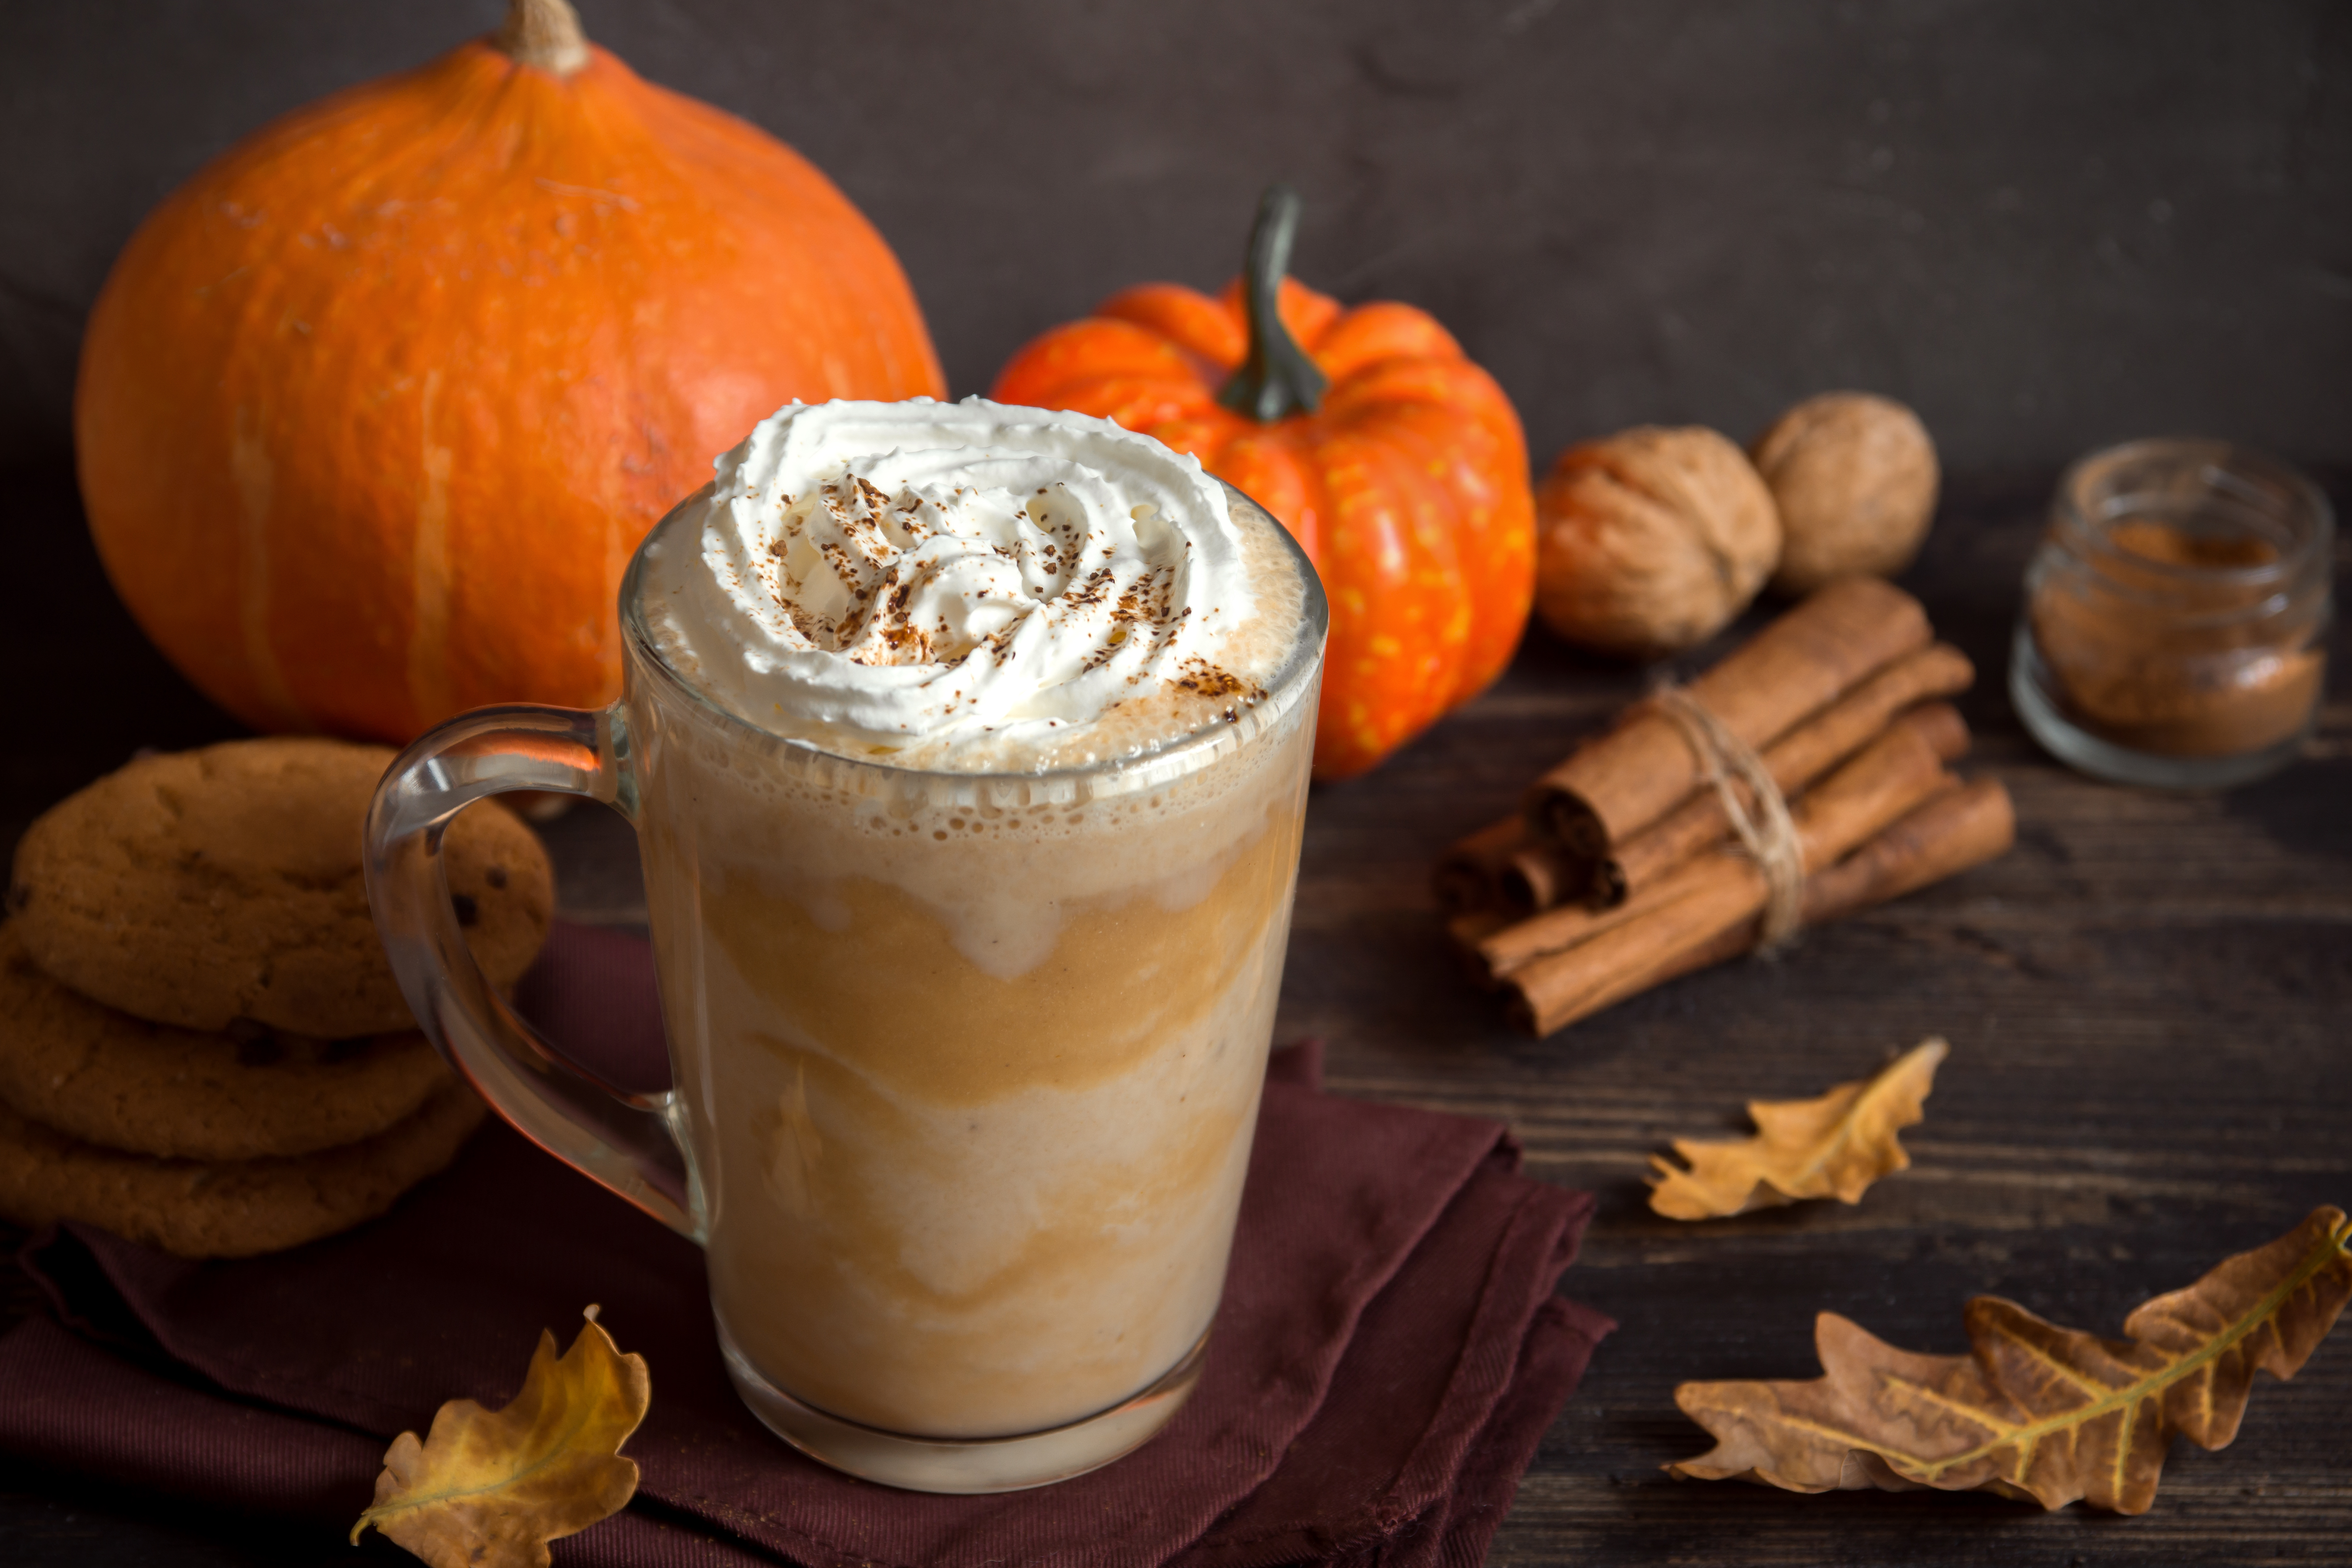 Starbucks Pumpkin Spice Latte Returns for Its 20th Year on Aug. 24